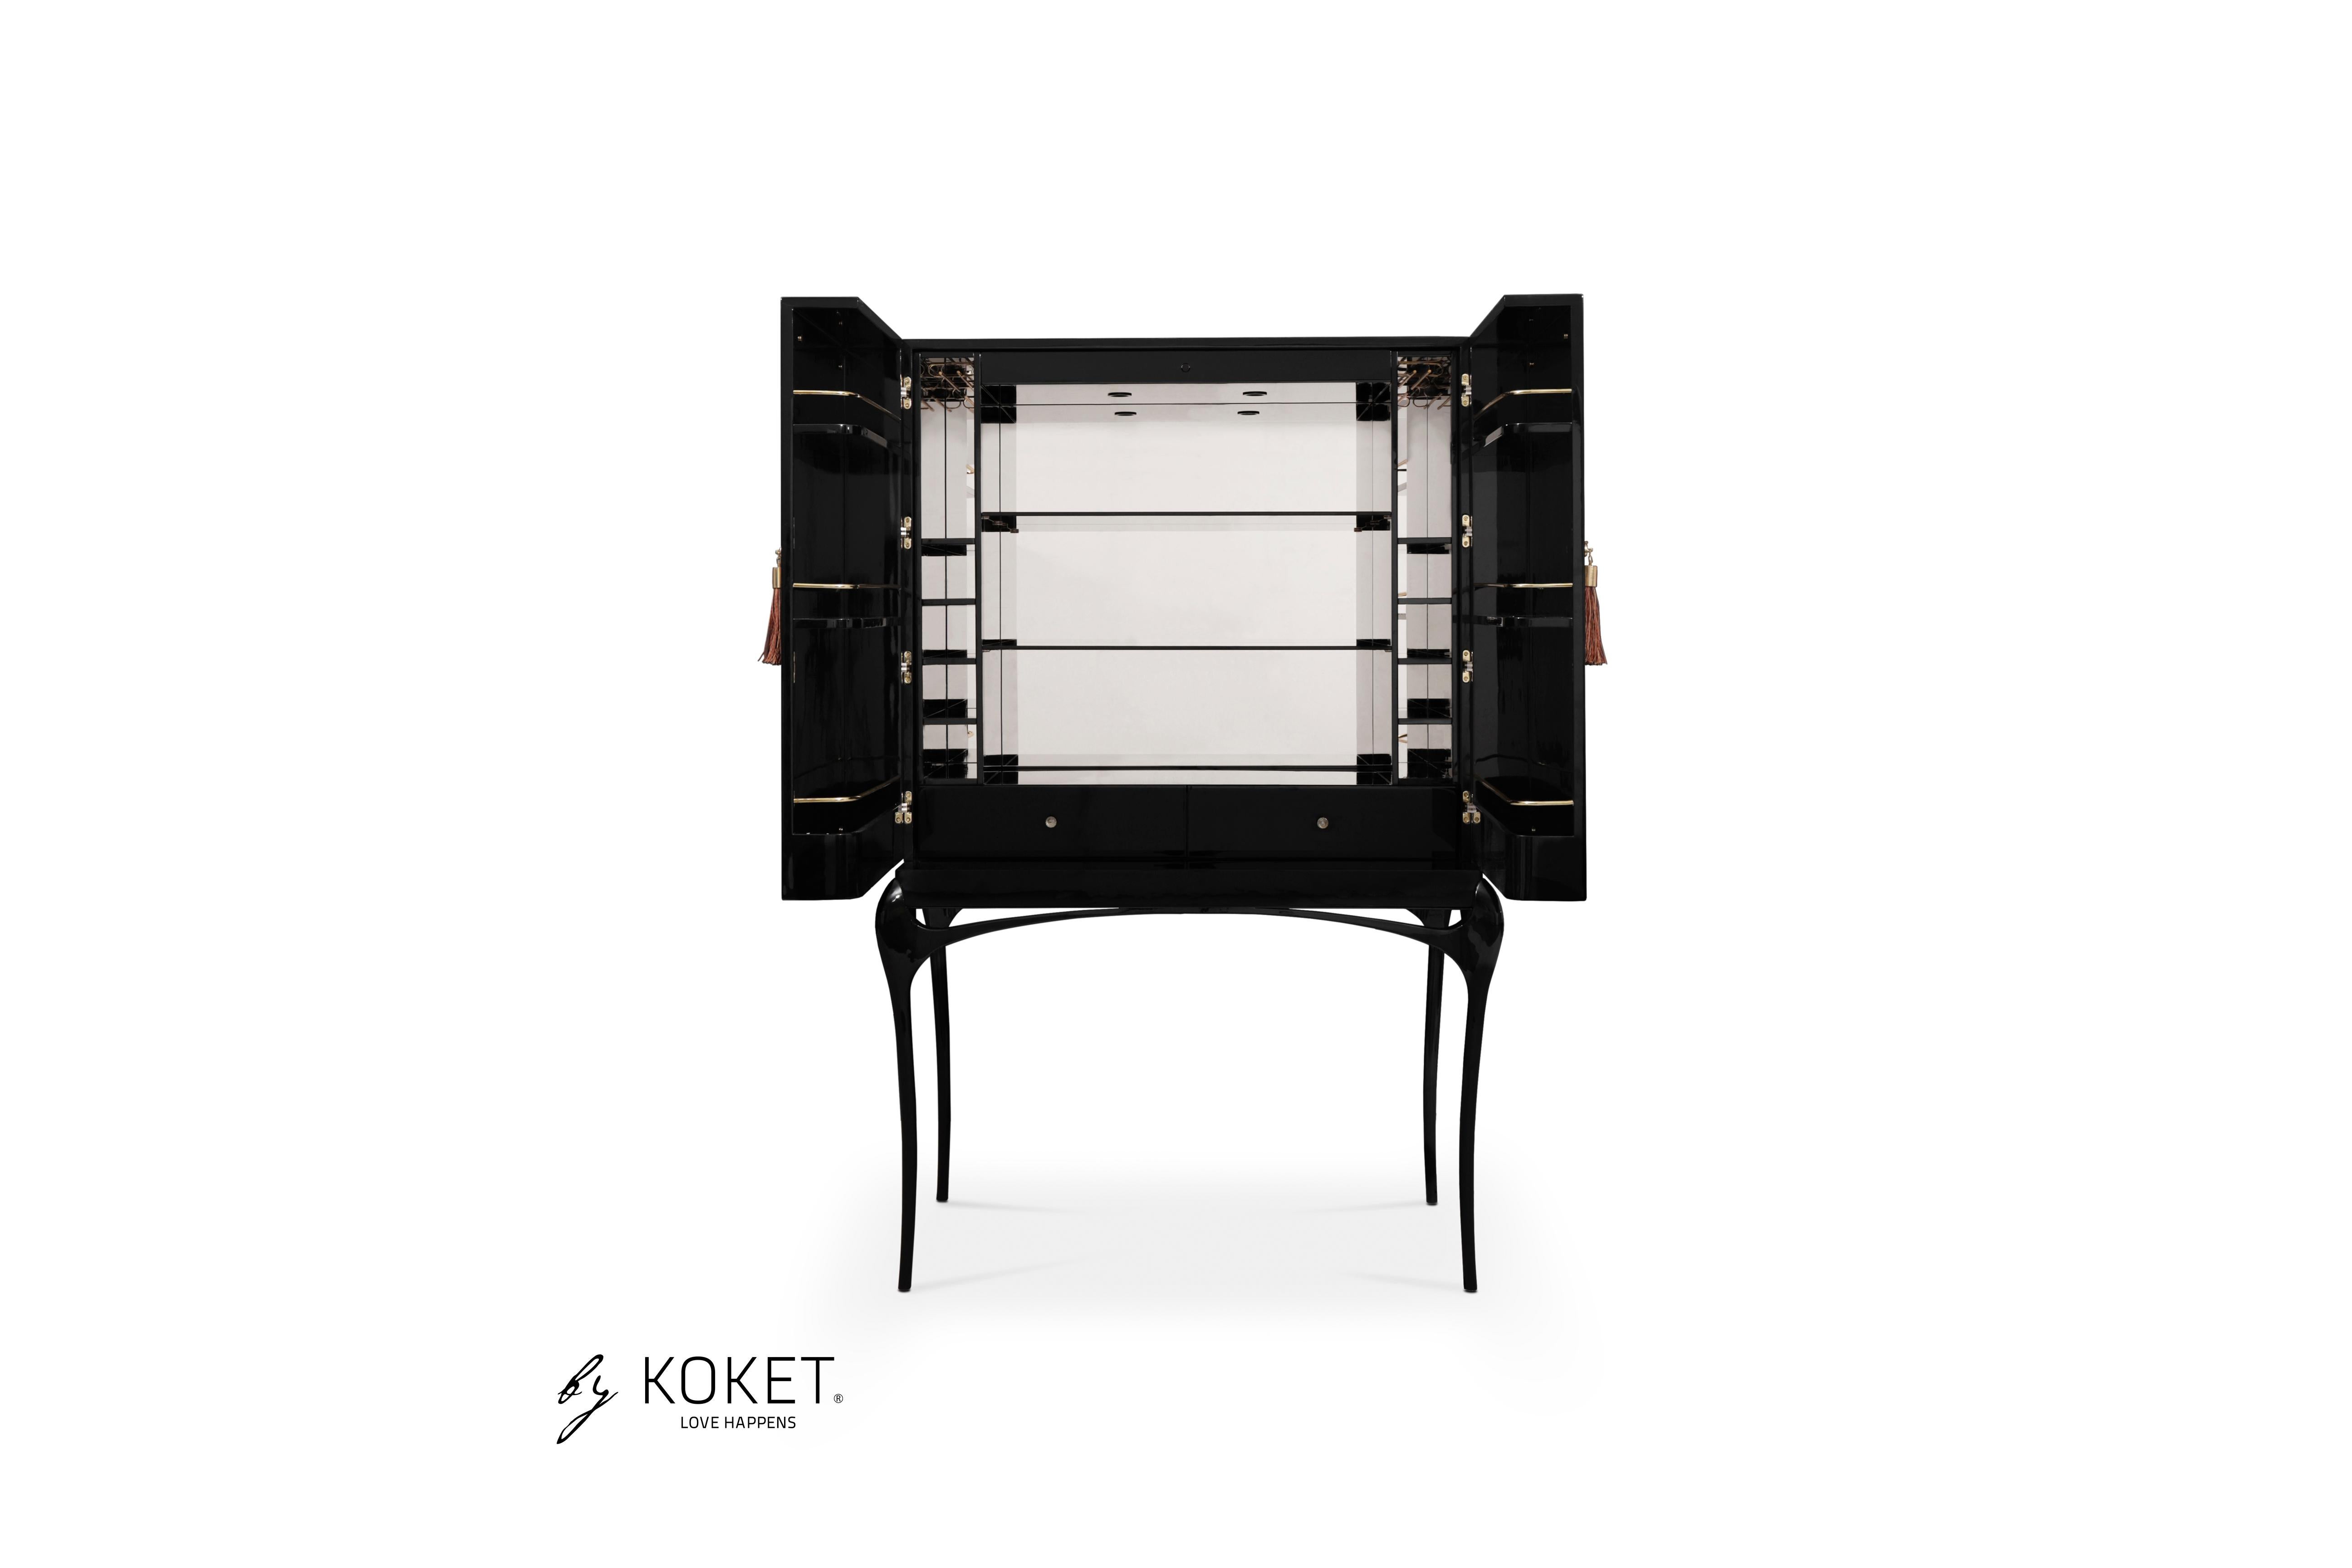 Enticing admirers with its exotic feather doors and sexy curved lacquered legs, the temptation bar cabinet will steal cocktail hour. The chic black and gold interior is perfectly designed to store your wine and cocktail accoutrements. Open or closed